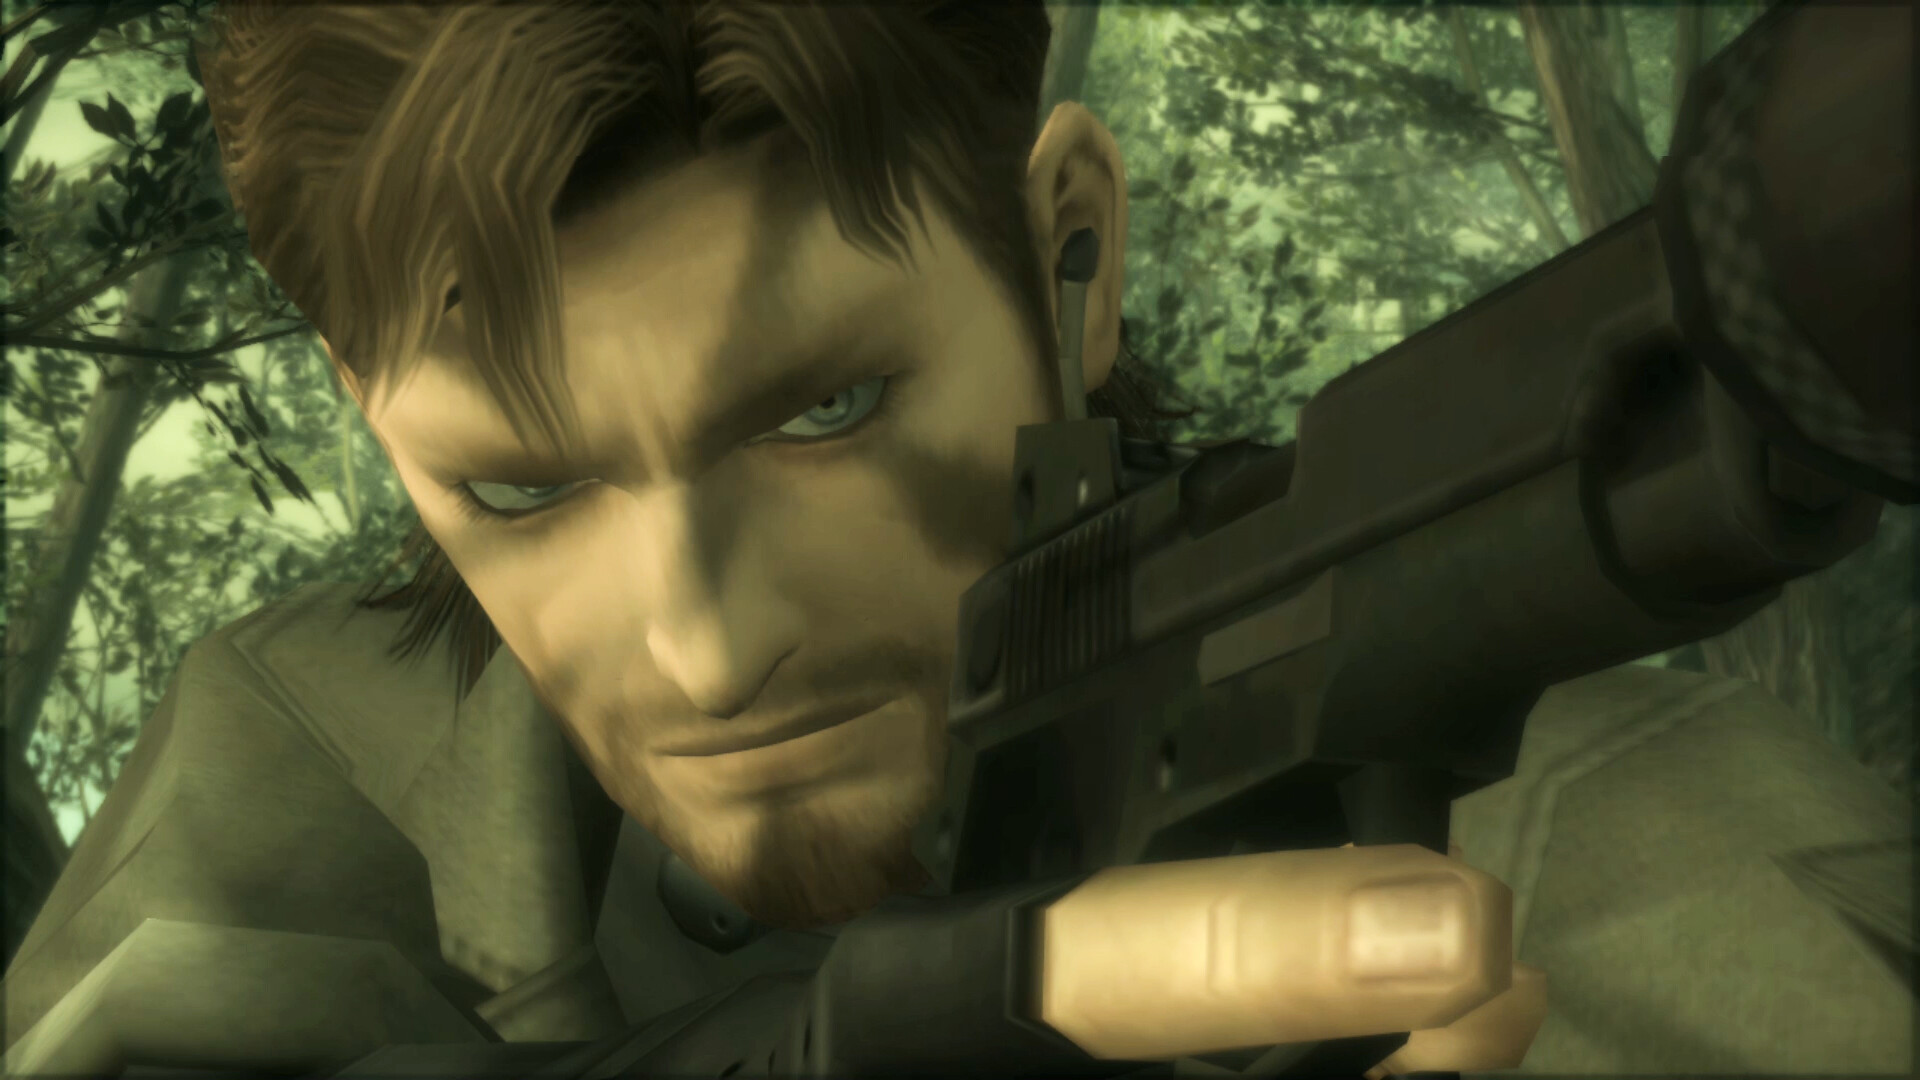 METAL GEAR SOLID 3: Snake Eater - Master Collection Version PlayStation 5 Account 16.95 $